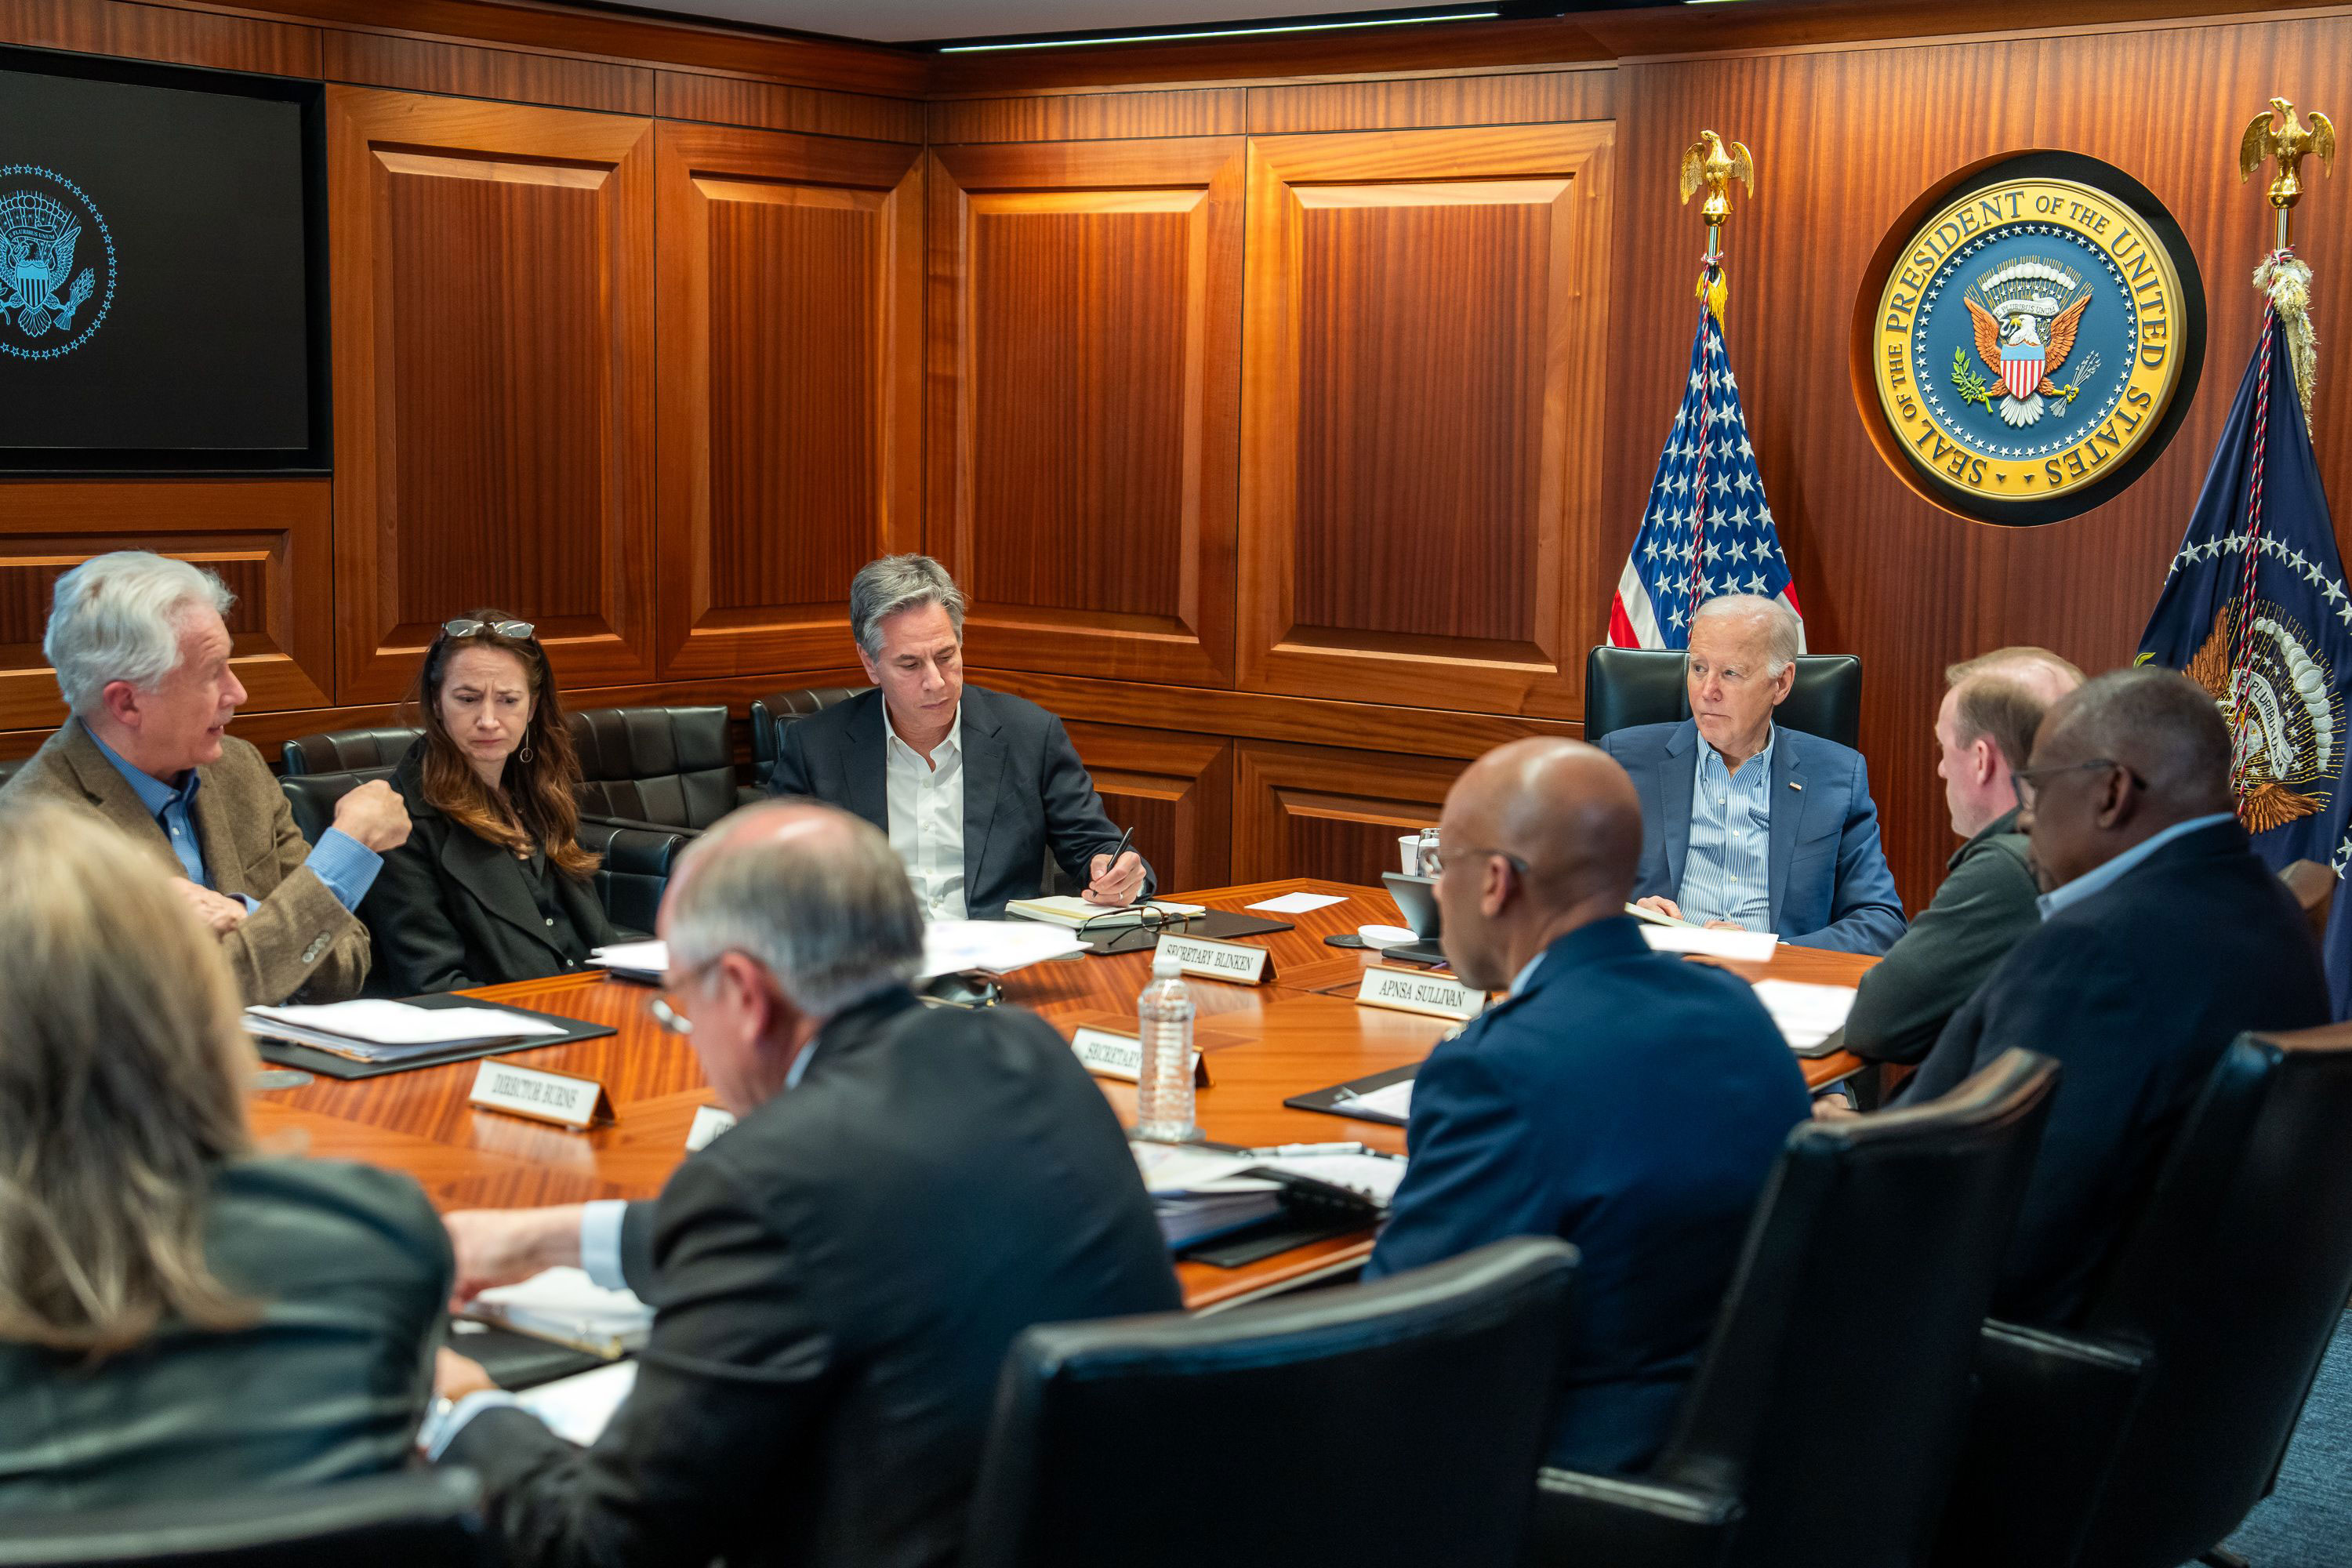 President Joe Biden meets with members of the National Security team regarding the unfolding missile attacks on Israel from Iran on Saturday in the White House Situation Room. Some portions of this handout photo have been blurred by the source. 